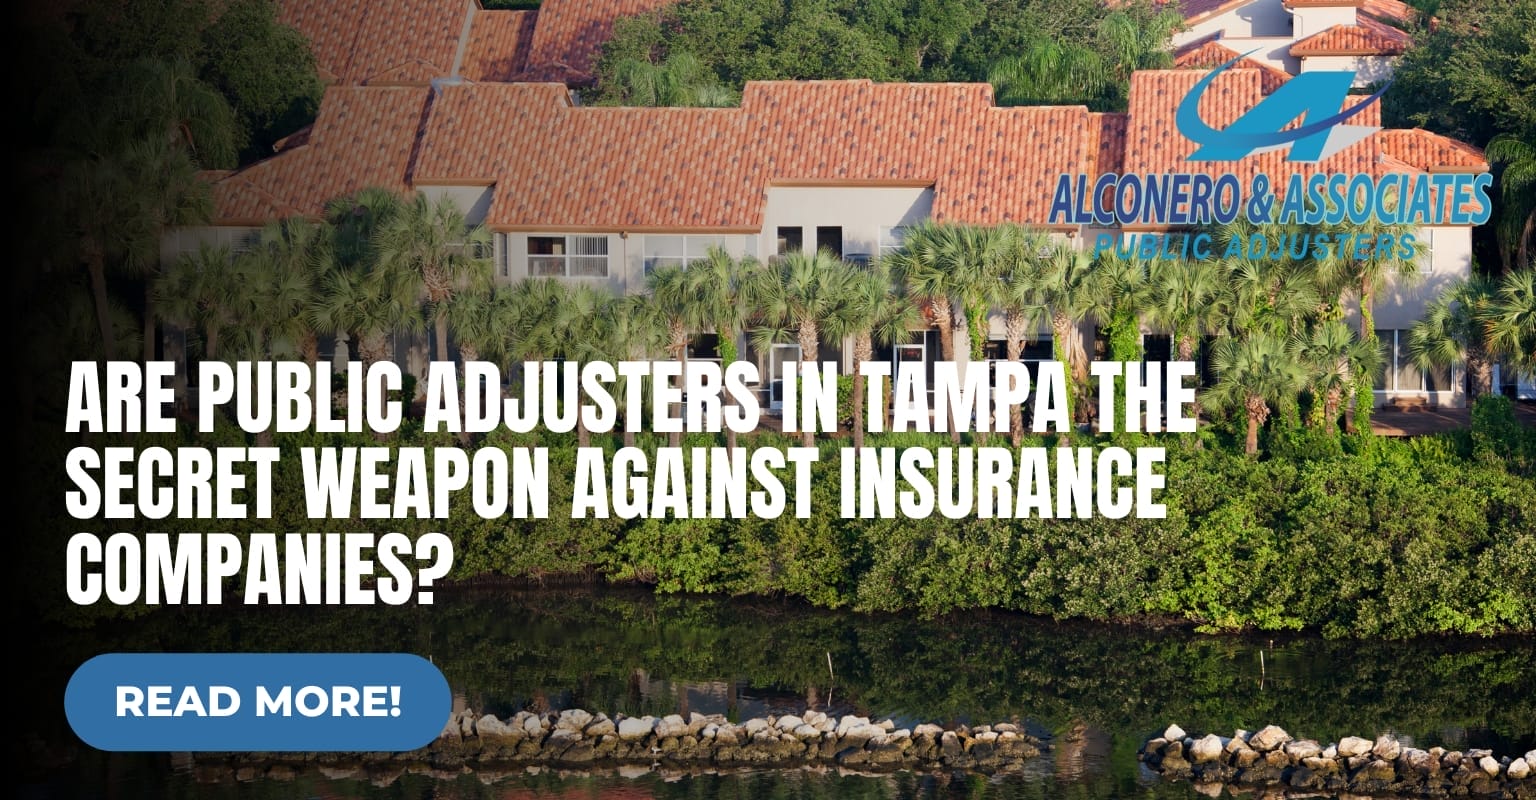 Are Public Adjusters in Tampa the Secret Weapon Against Insurance Companies?